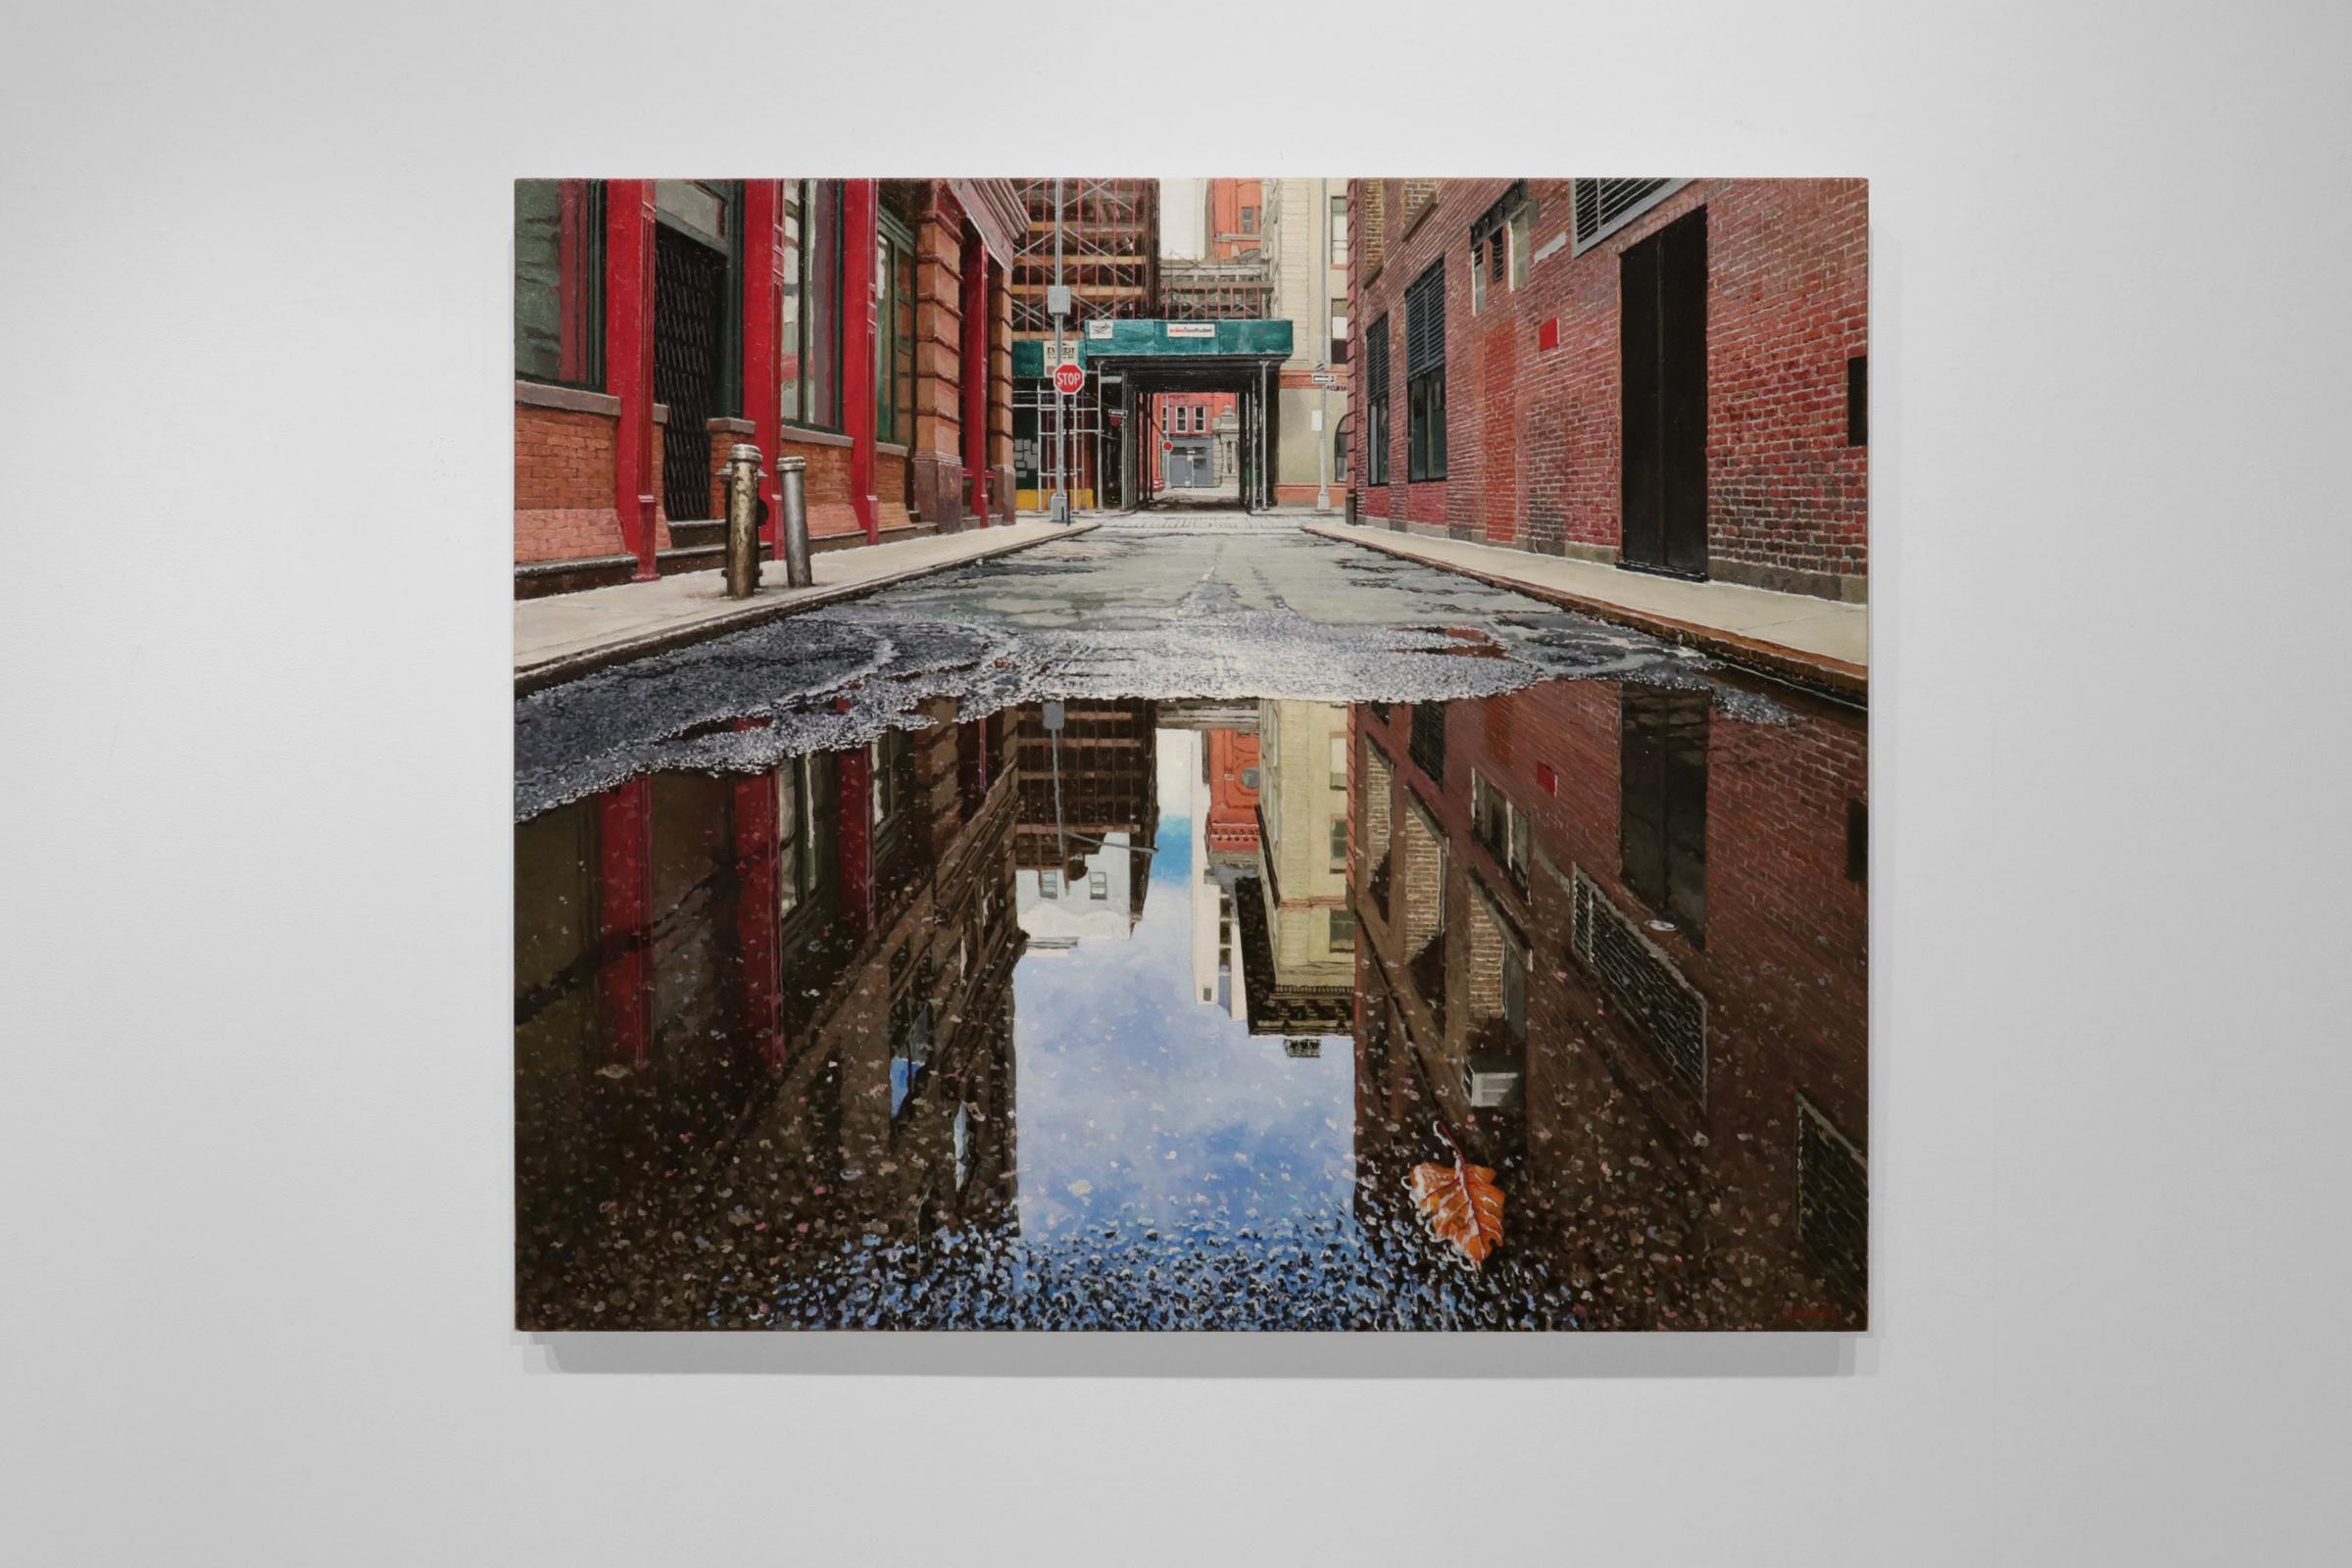 AUTUMN REFLECTIONS STAPLE STREET MANHATTAN, photorealism, red brick, reflection - Painting by Richard Combes